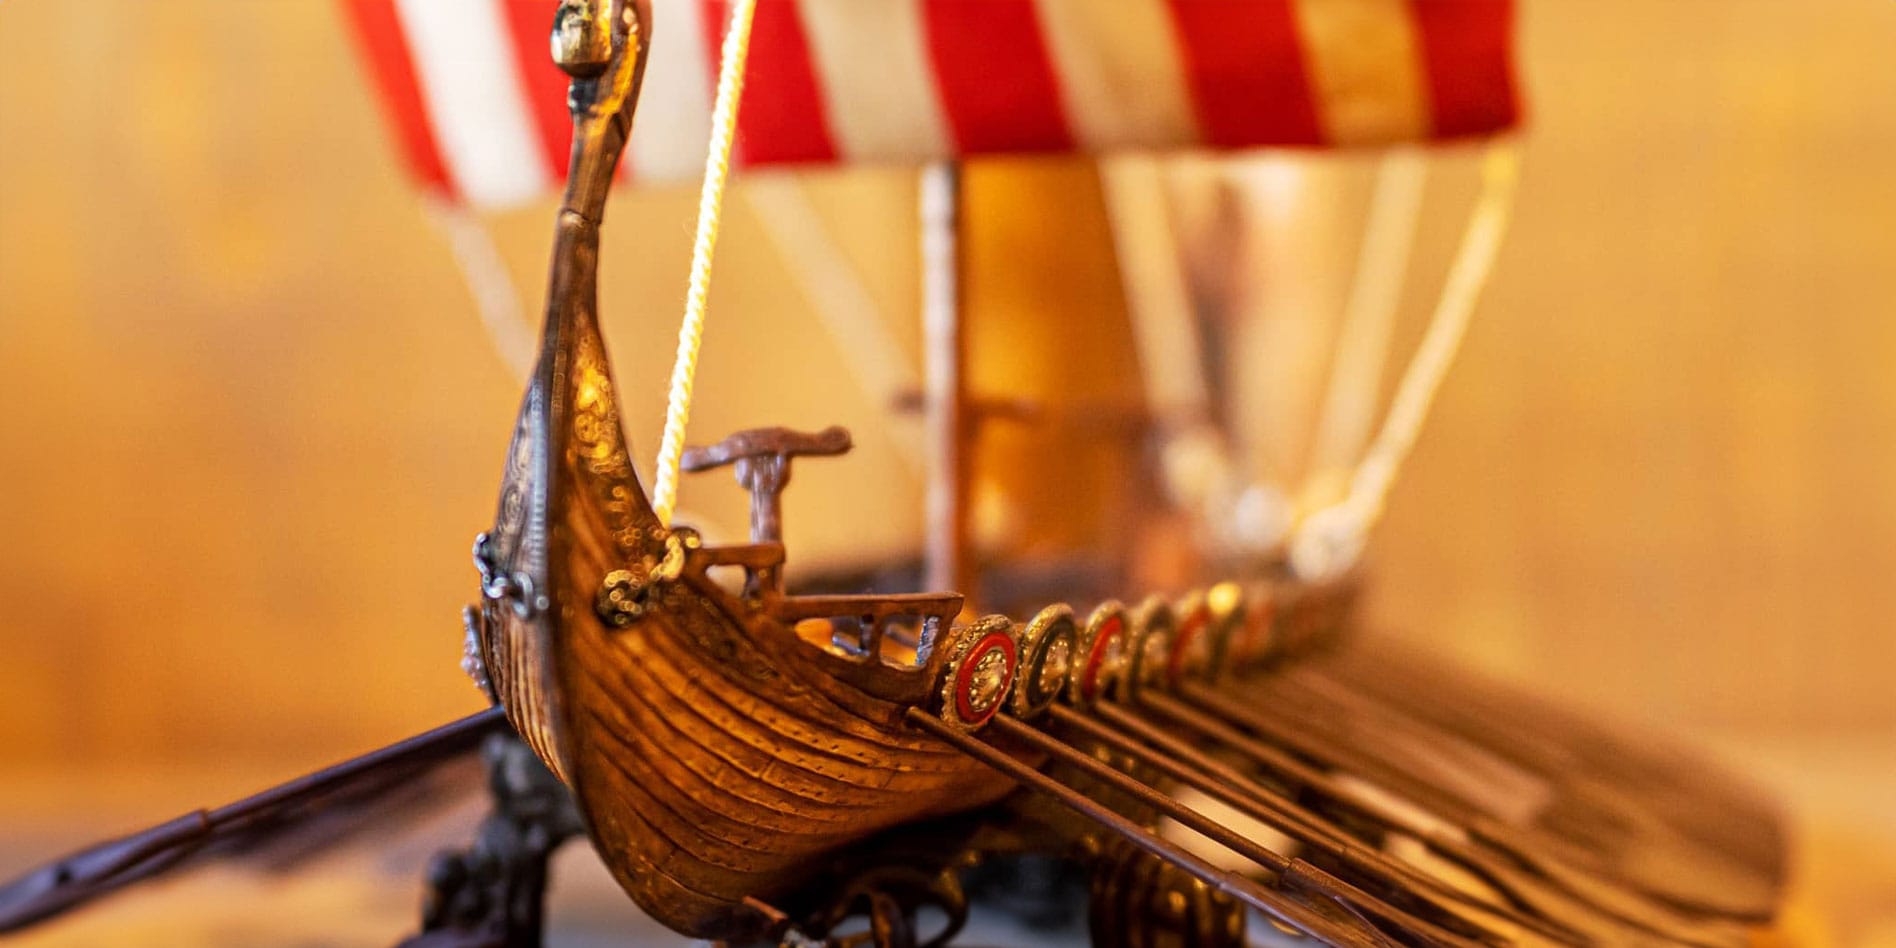 Model viking ship with red and white striped sail and oars with viking shields at each oar opening